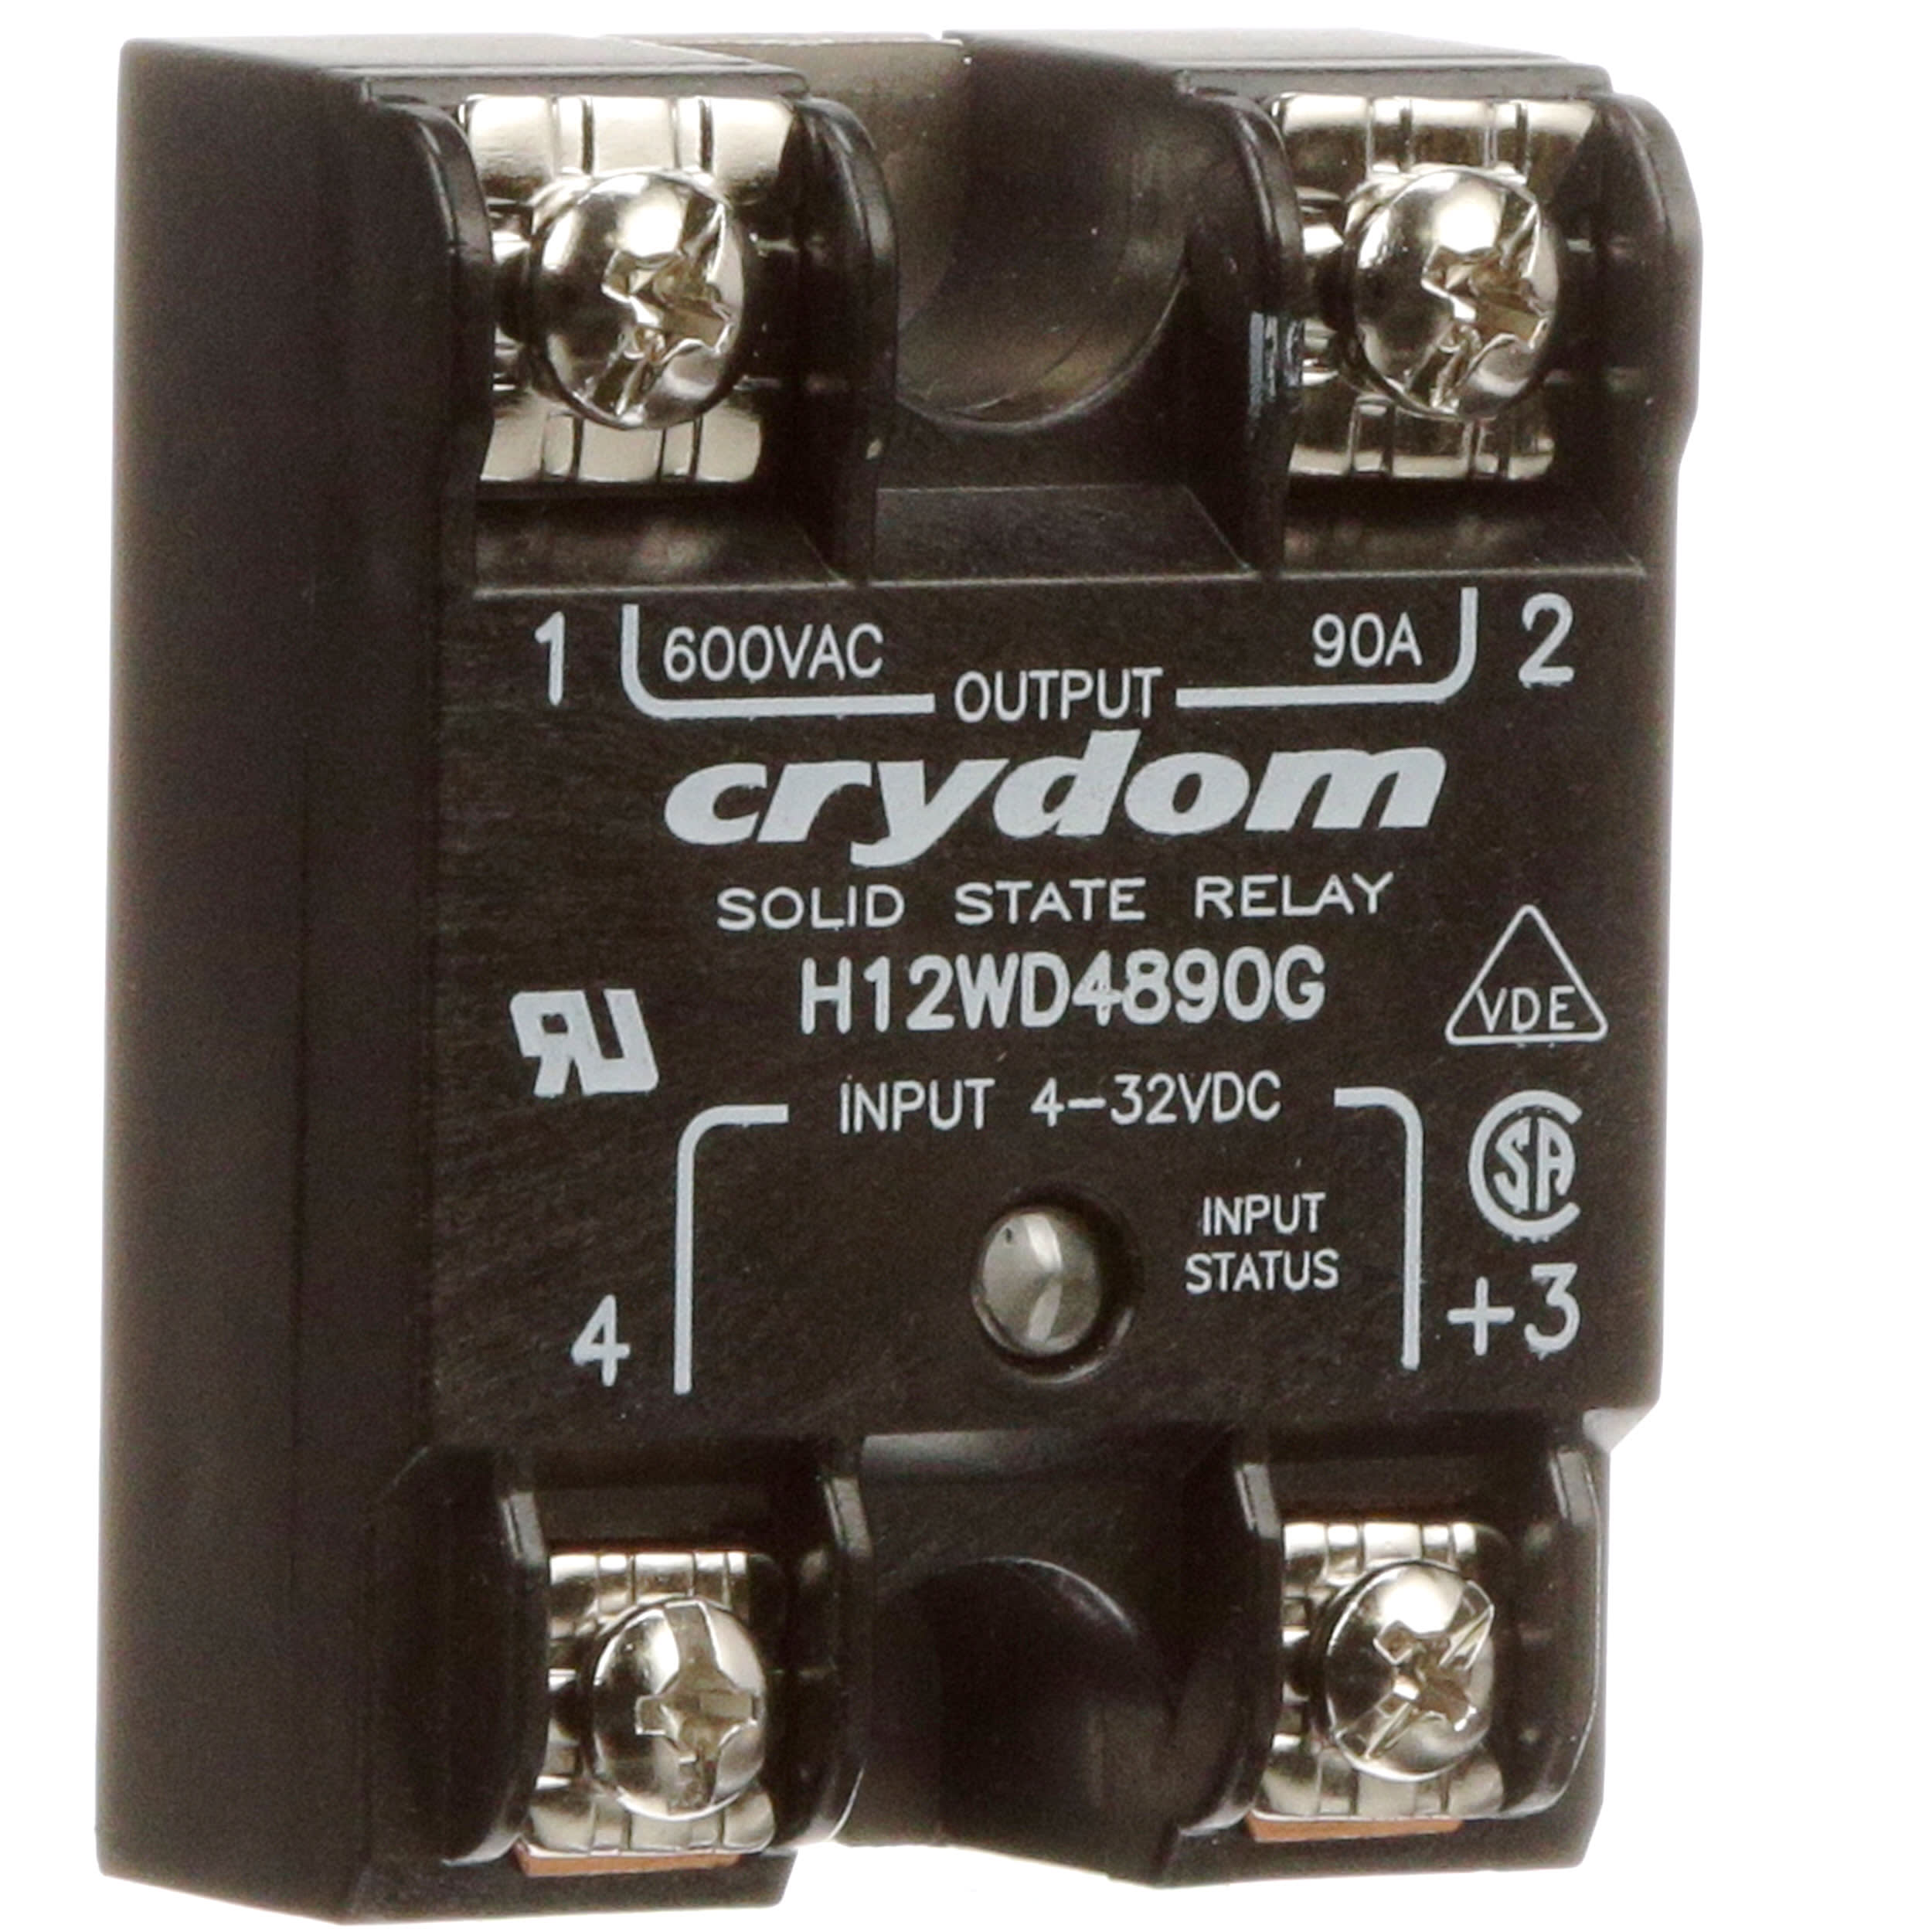 Crydom Sensata h12wd4890g Solid State Relay Spst 